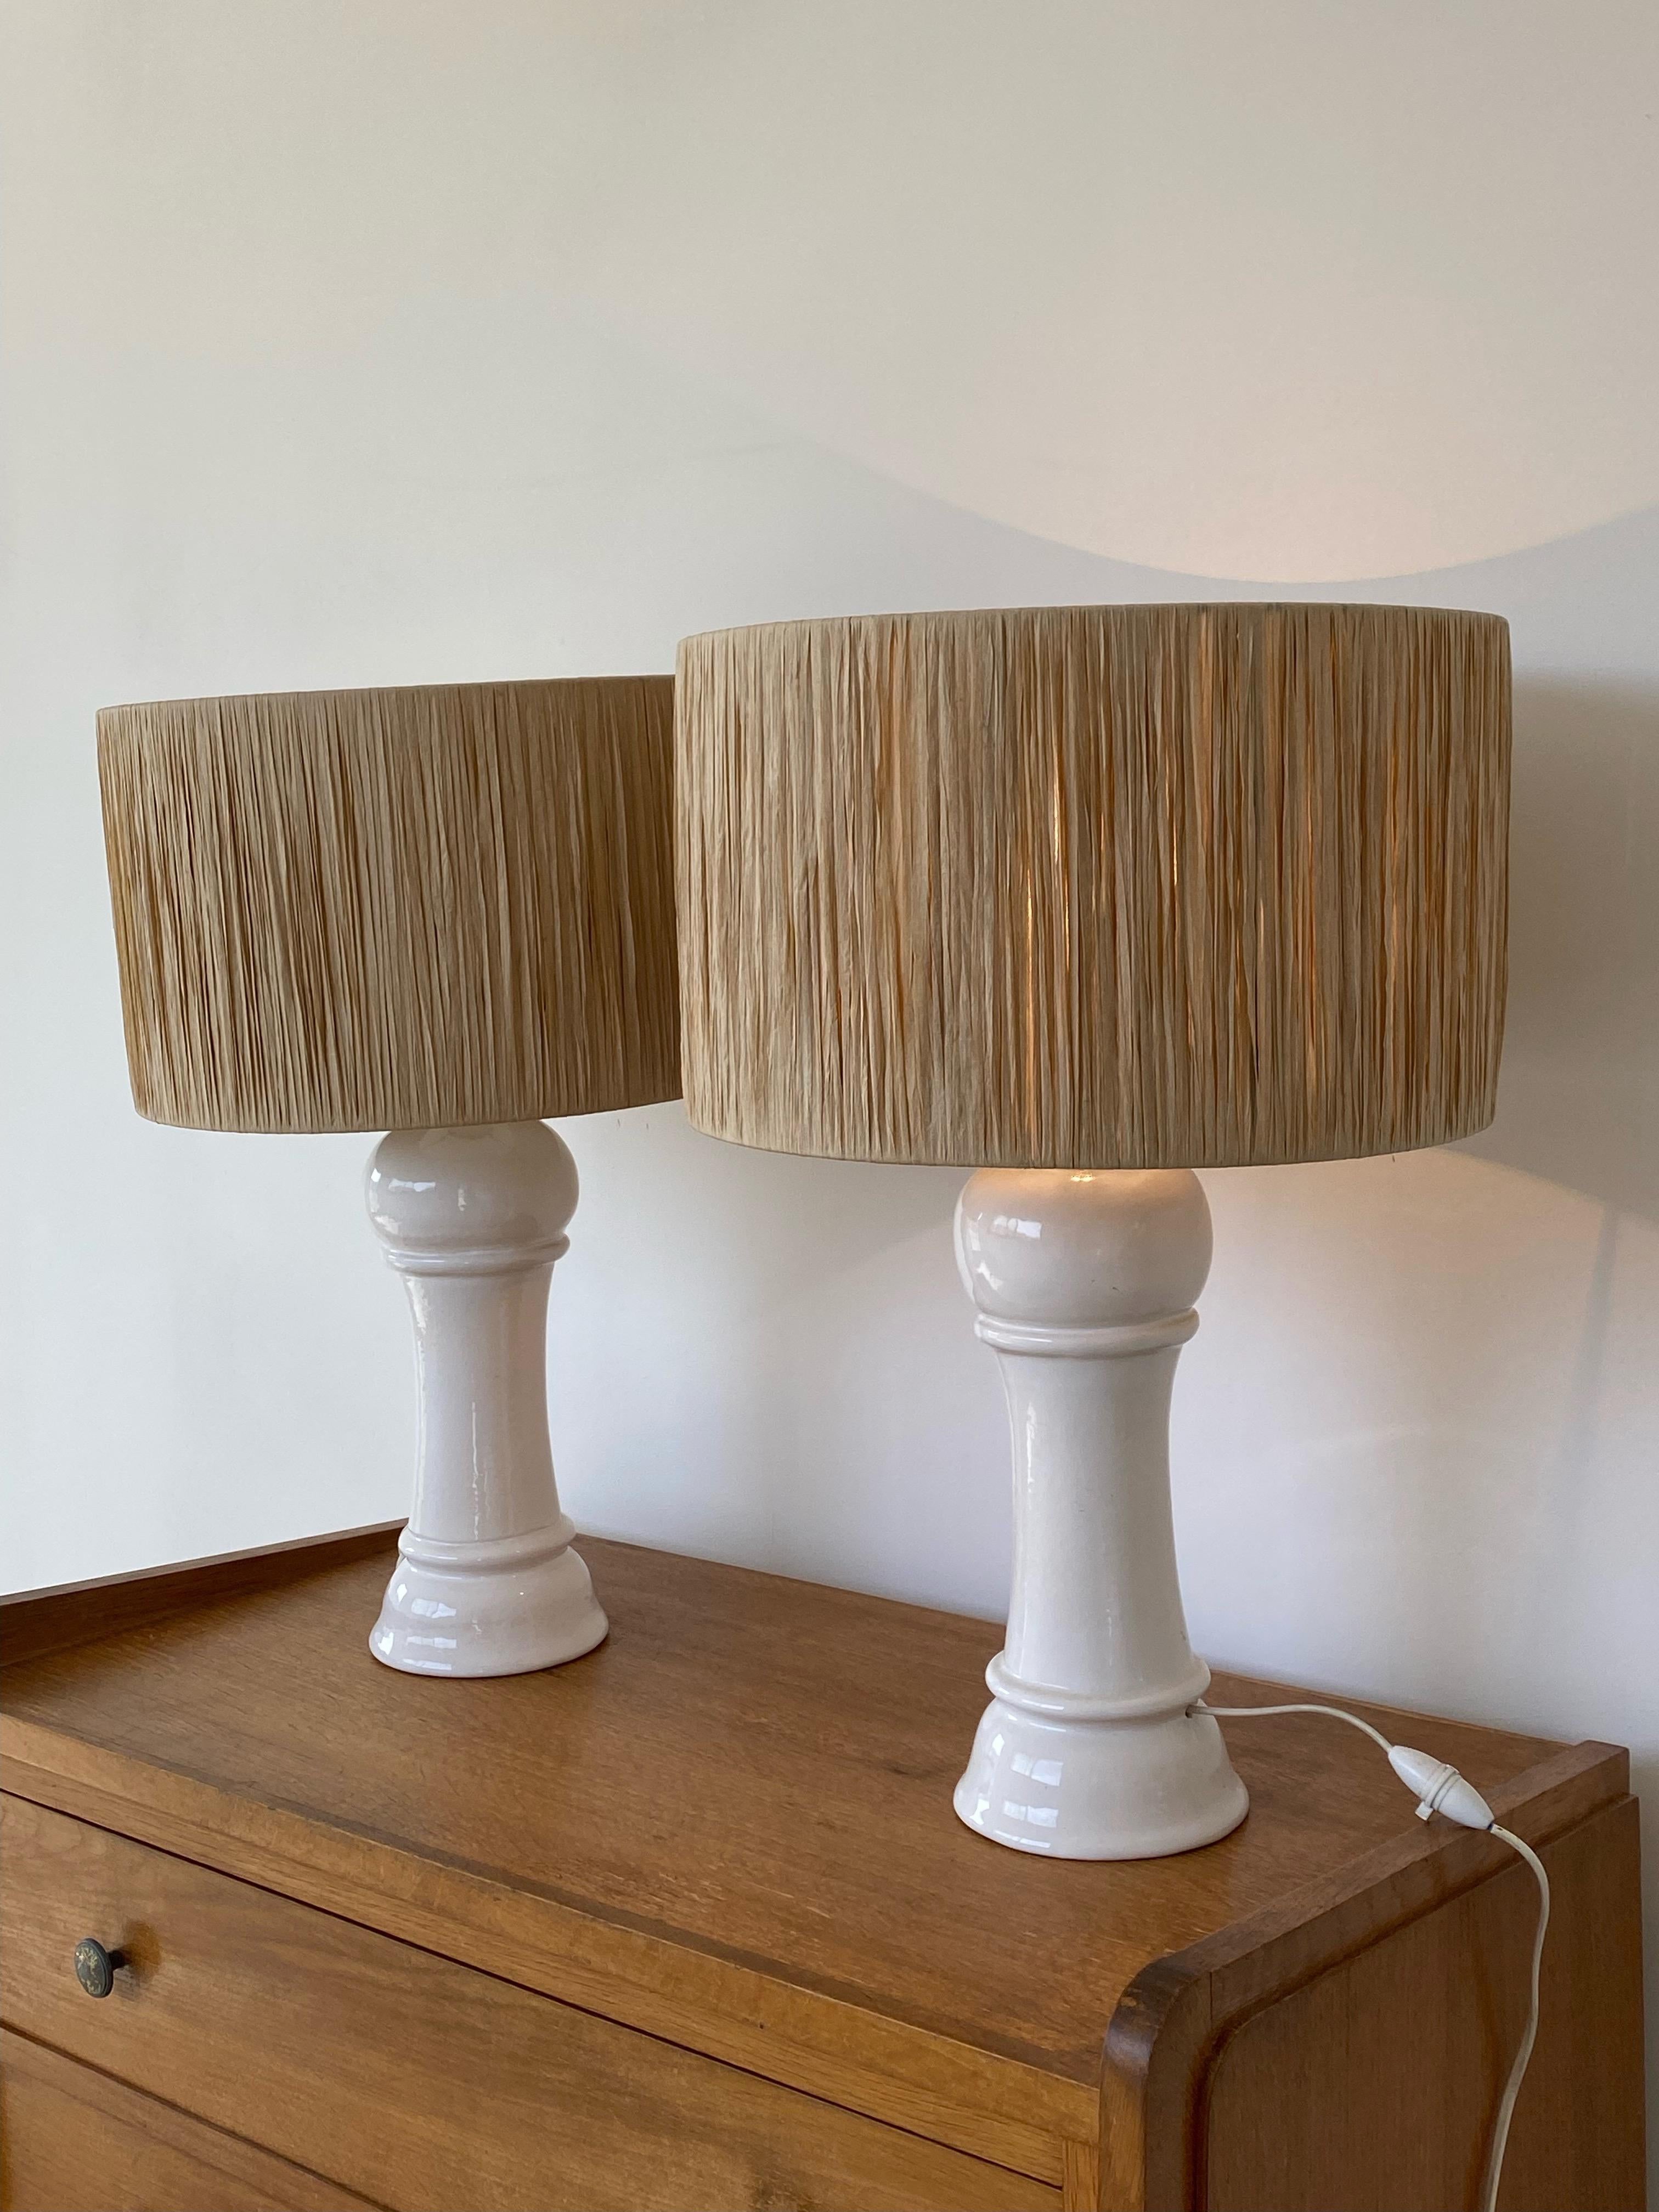 Mid-20th Century Pair Of White Ceramic Lamps With Raffia Shade, Italy, 1960s For Sale